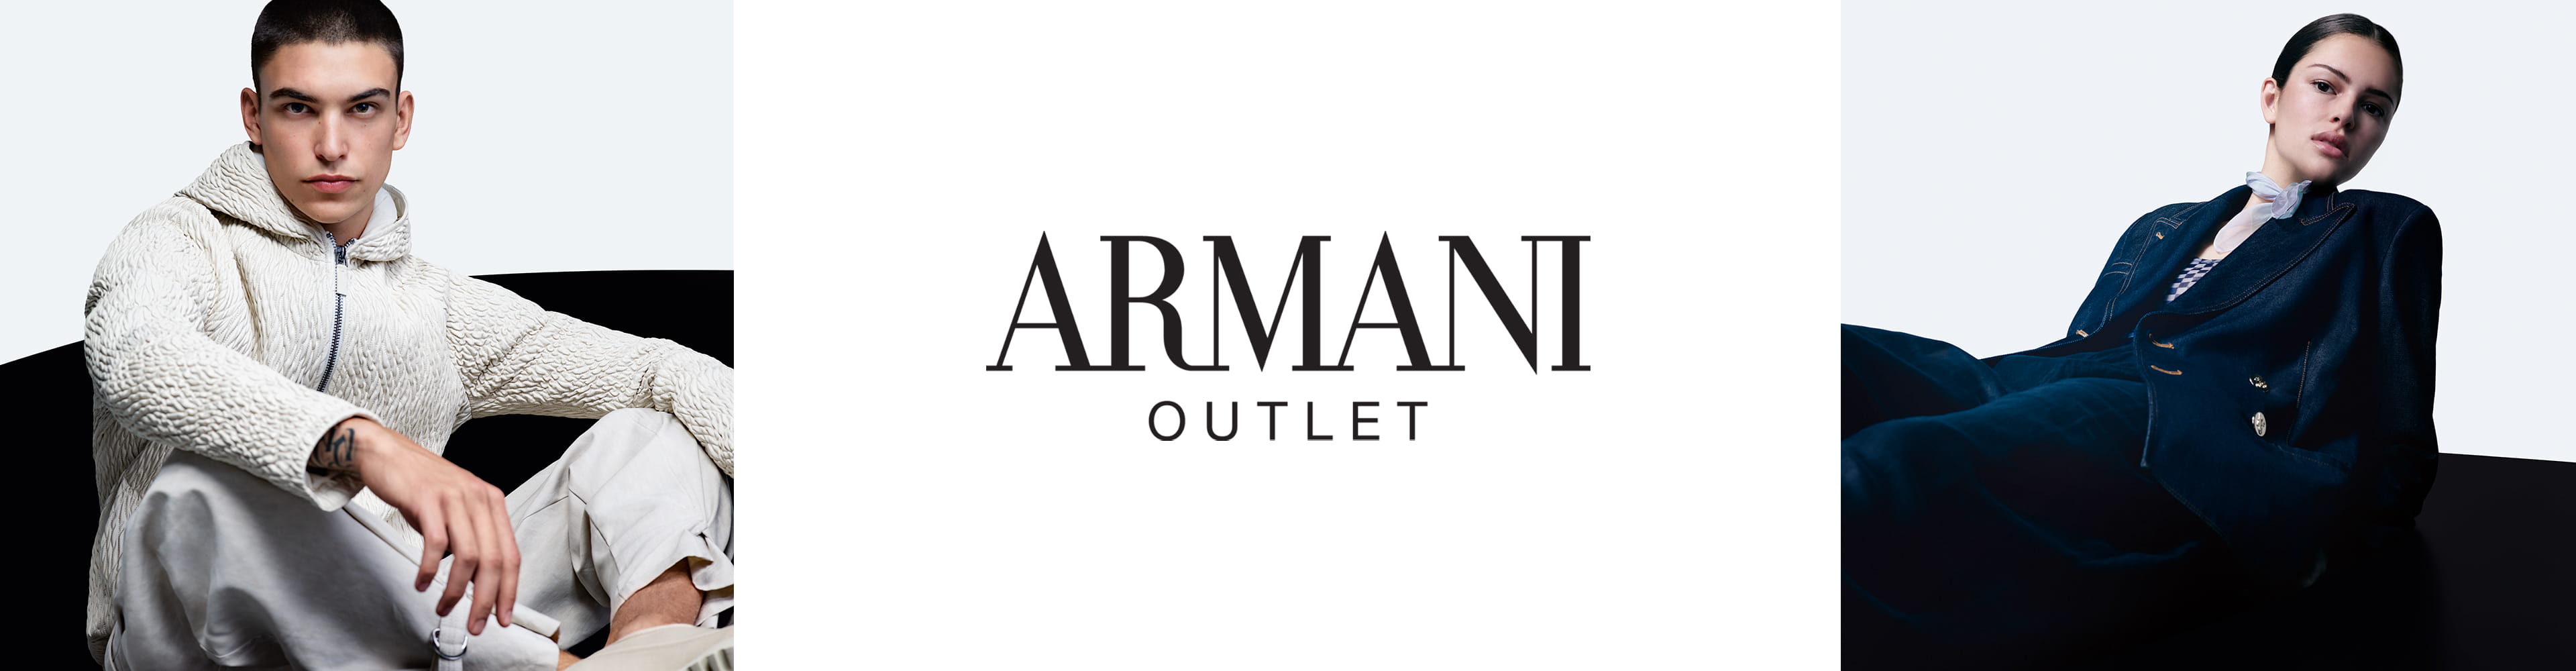 Armani Outlet - Shopping | Citygate Outlets